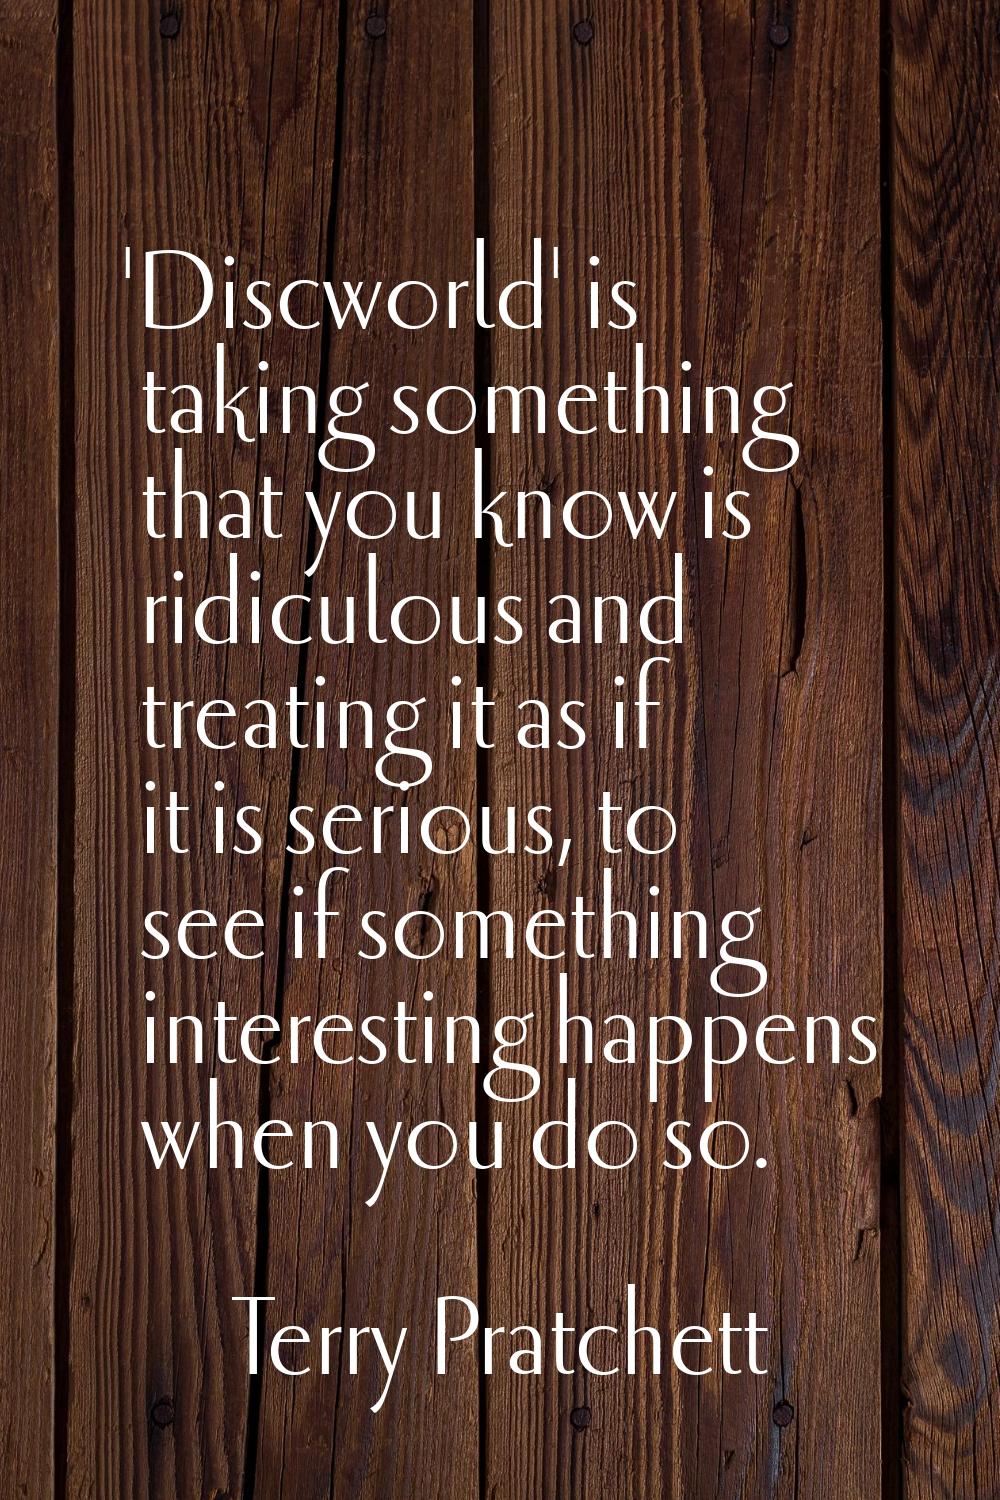 'Discworld' is taking something that you know is ridiculous and treating it as if it is serious, to